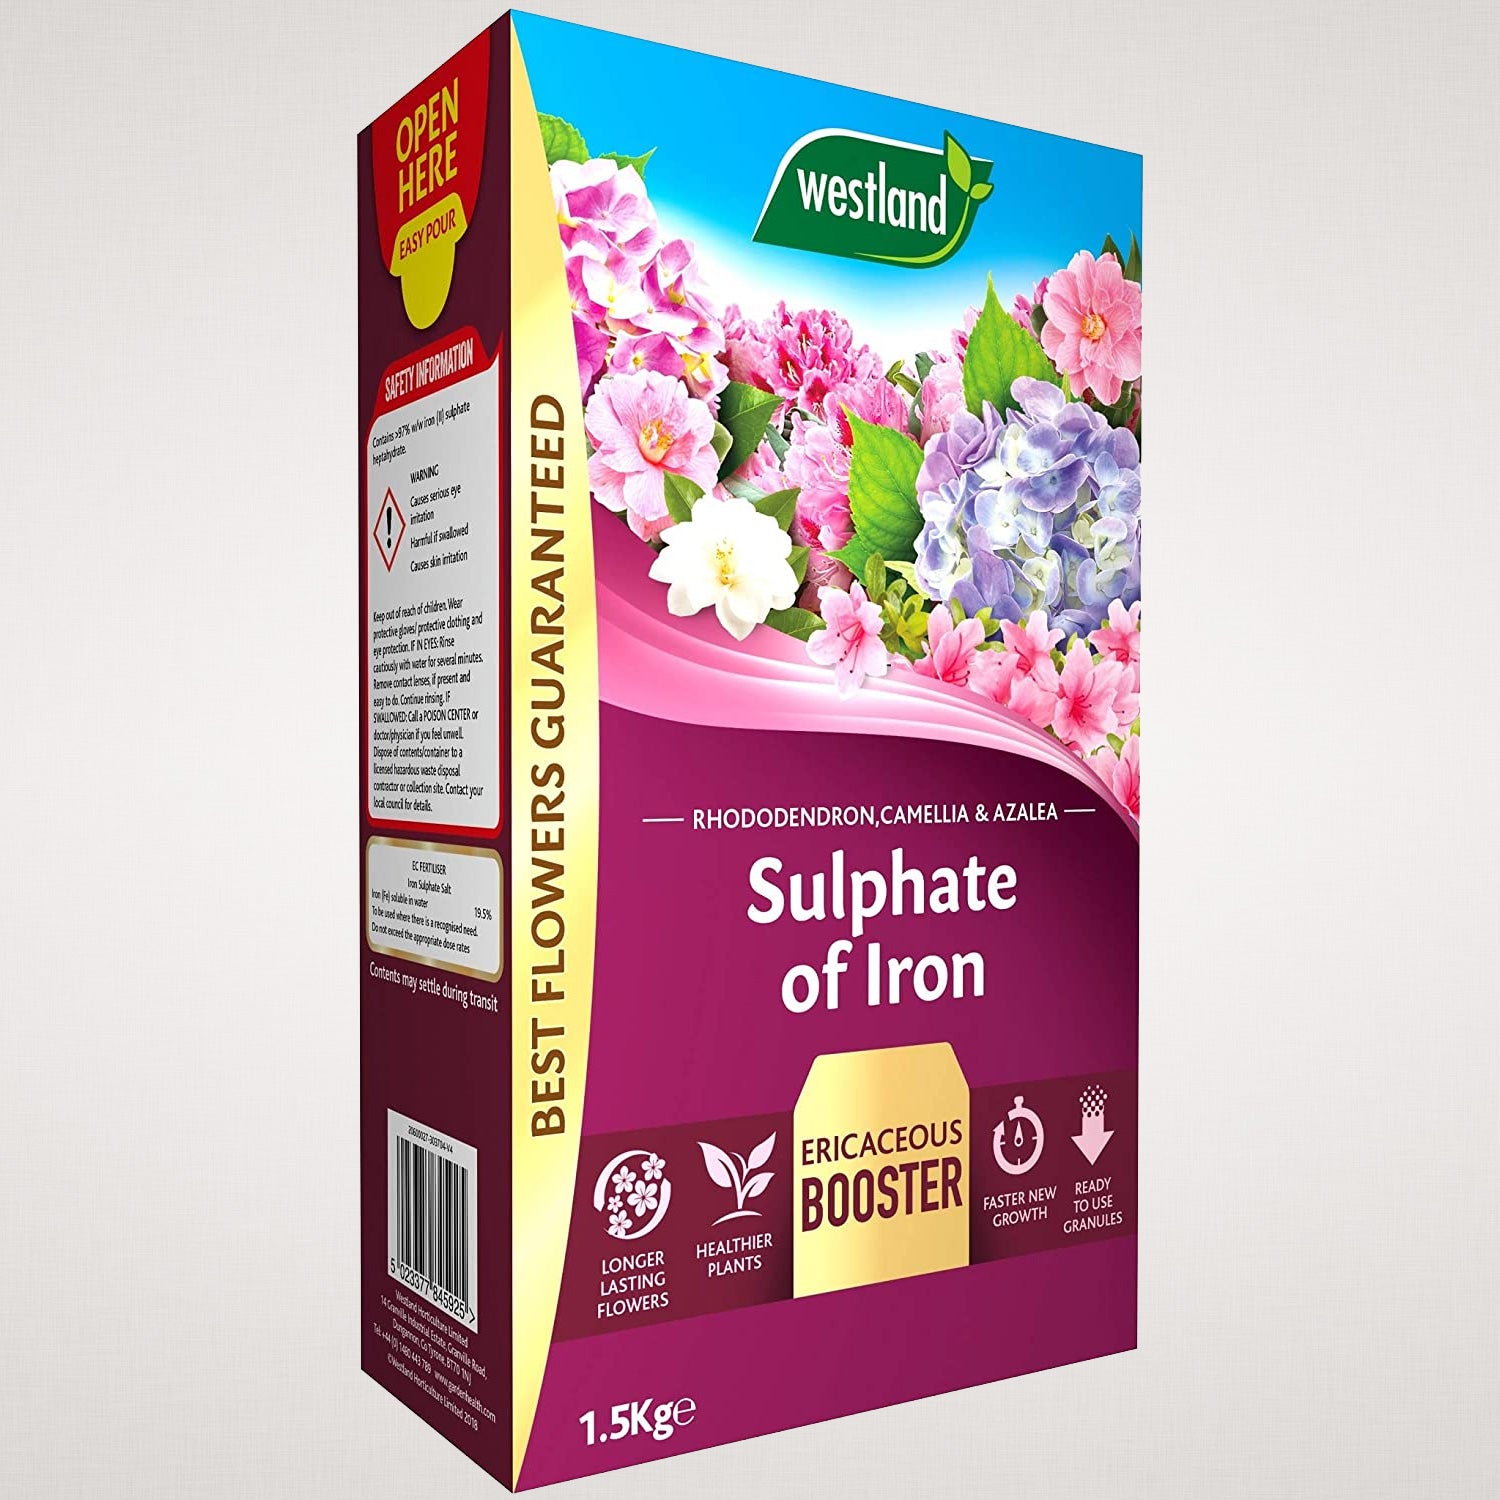 Westland Sulphate of Iron Ericaceous Booster - 1.5kg